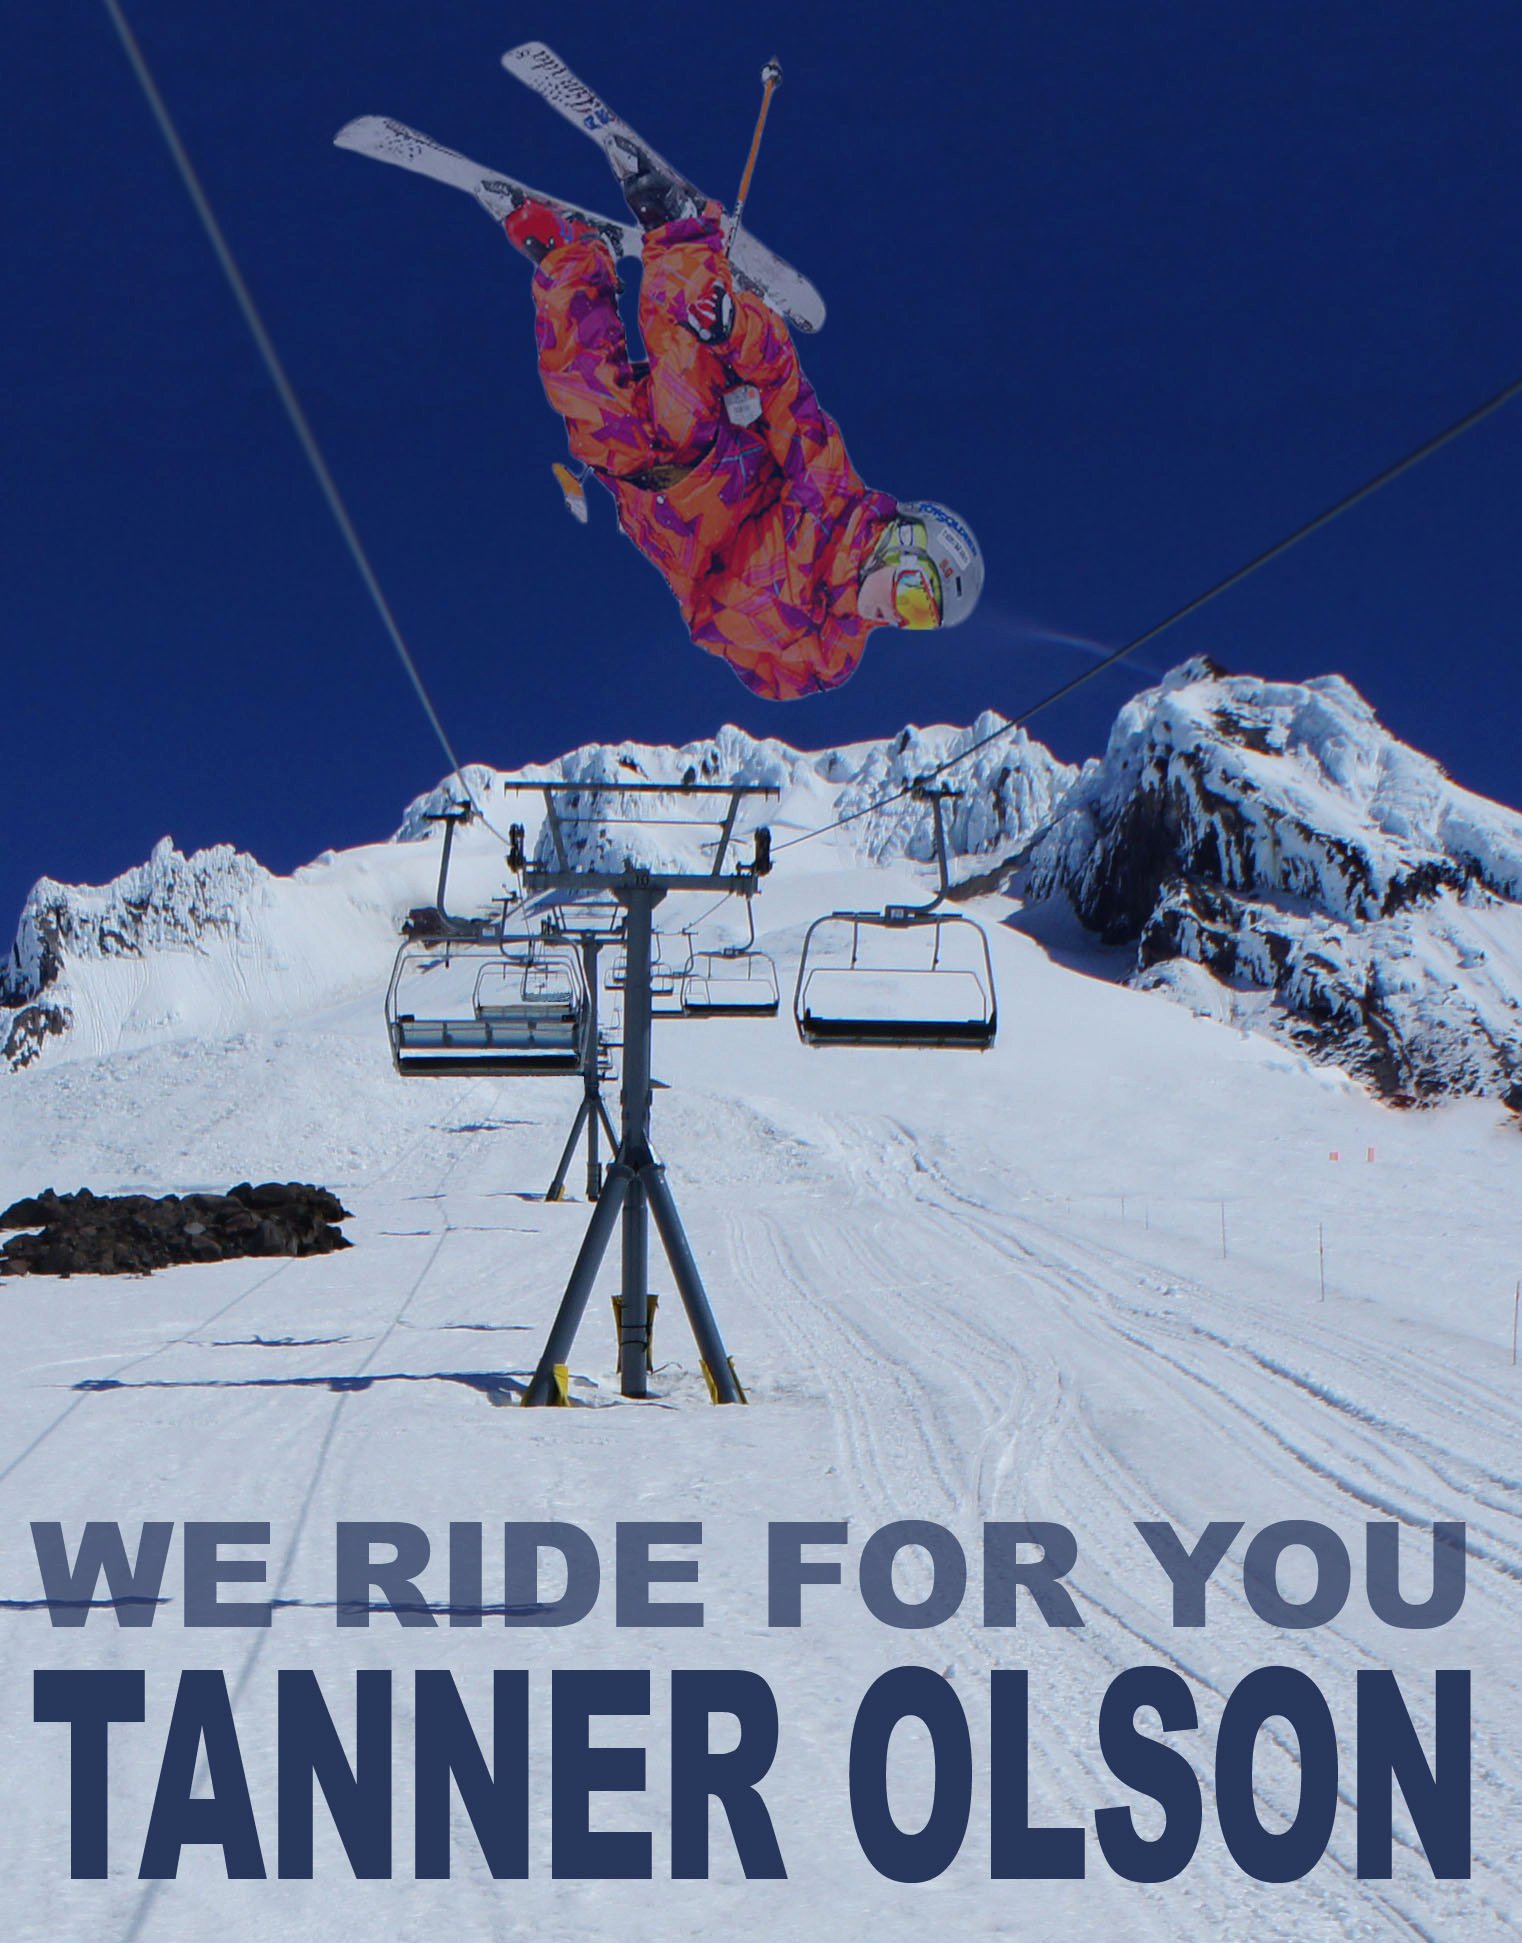 WE RIDE FOR YOU